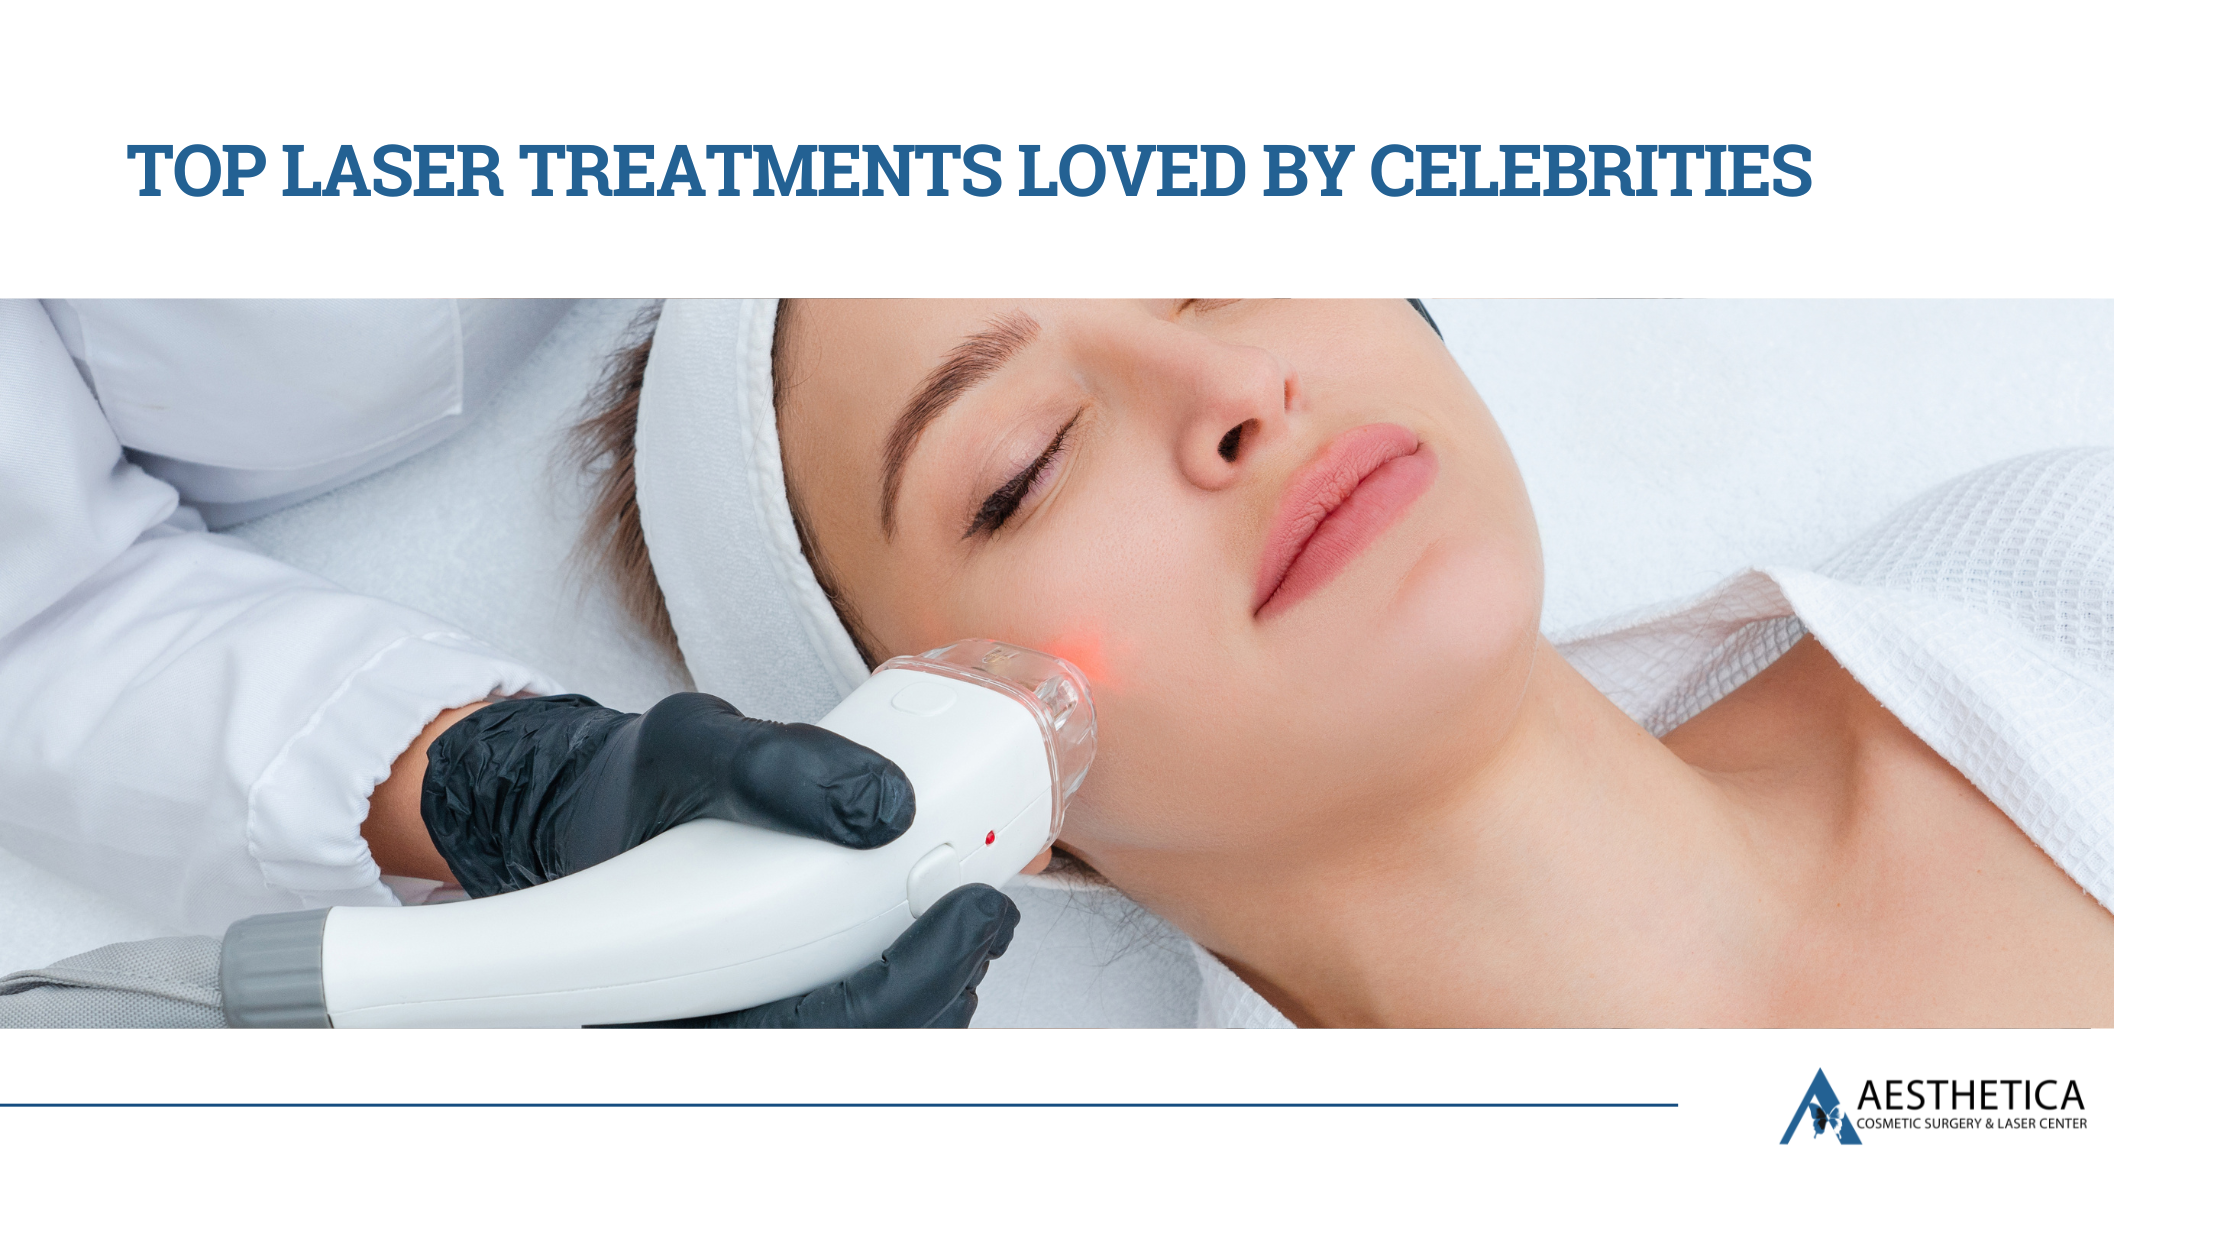 Top Laser Treatments Loved by Celebrities